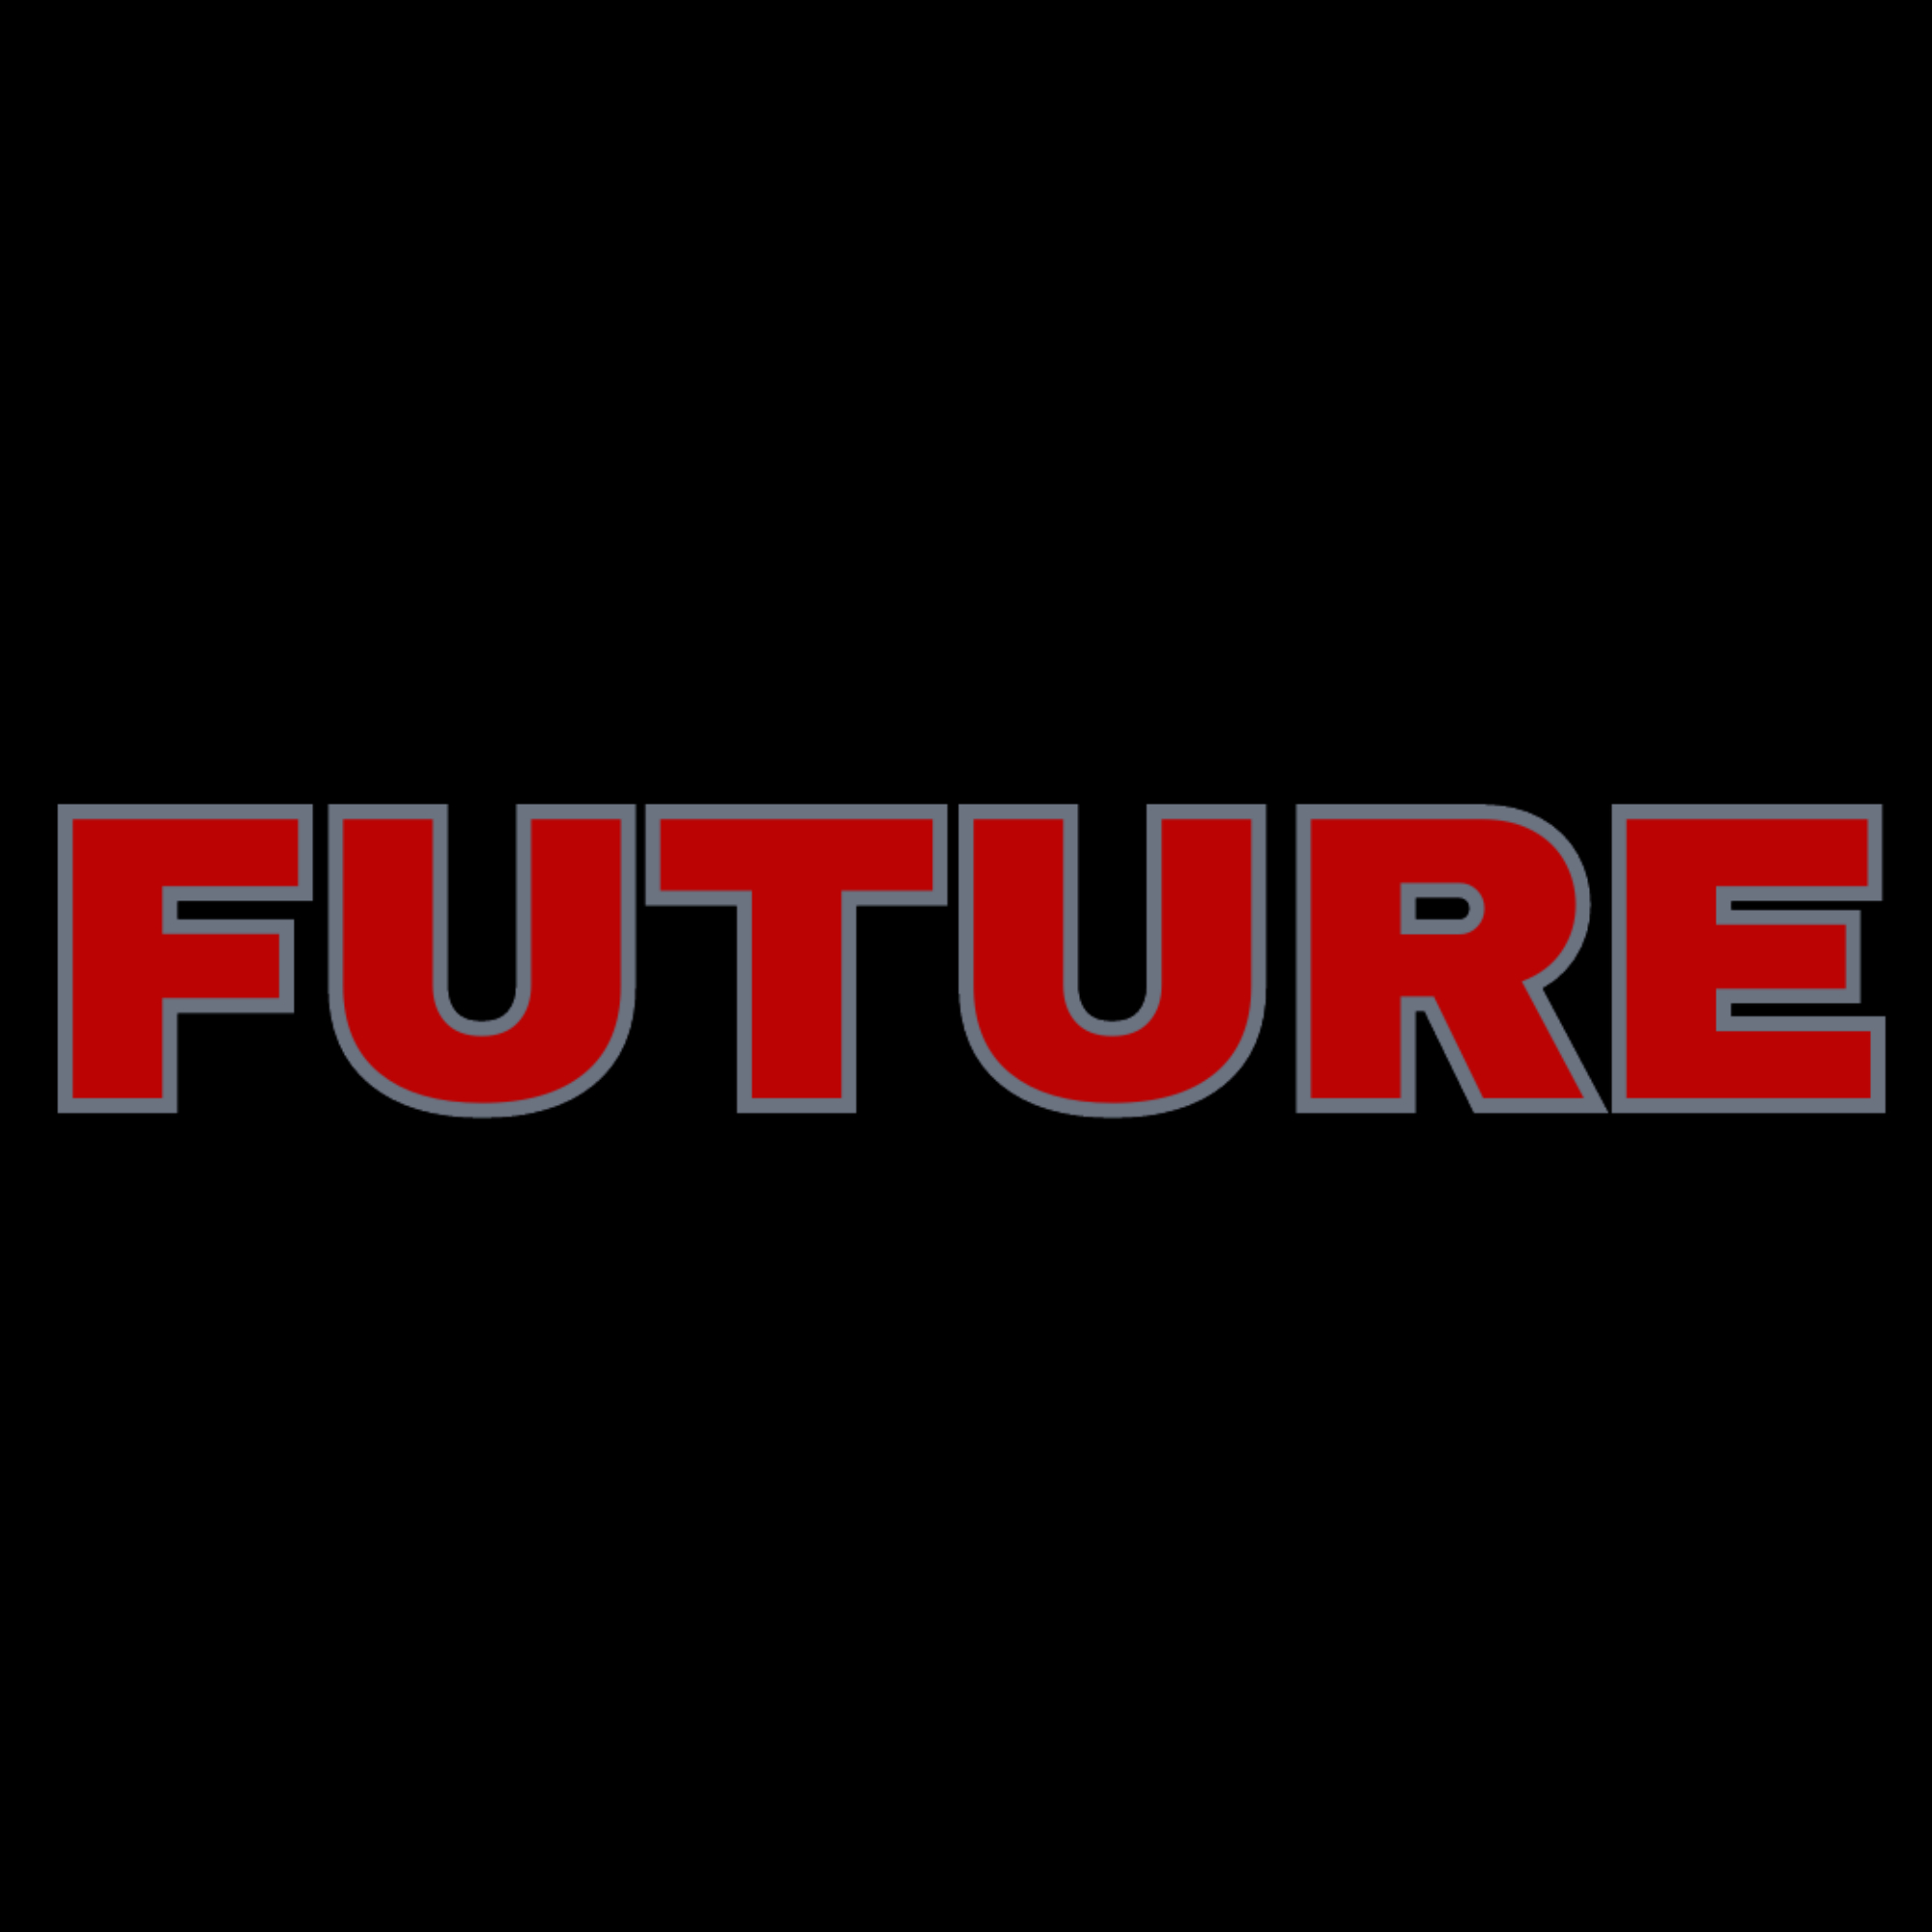 The official logo of Future